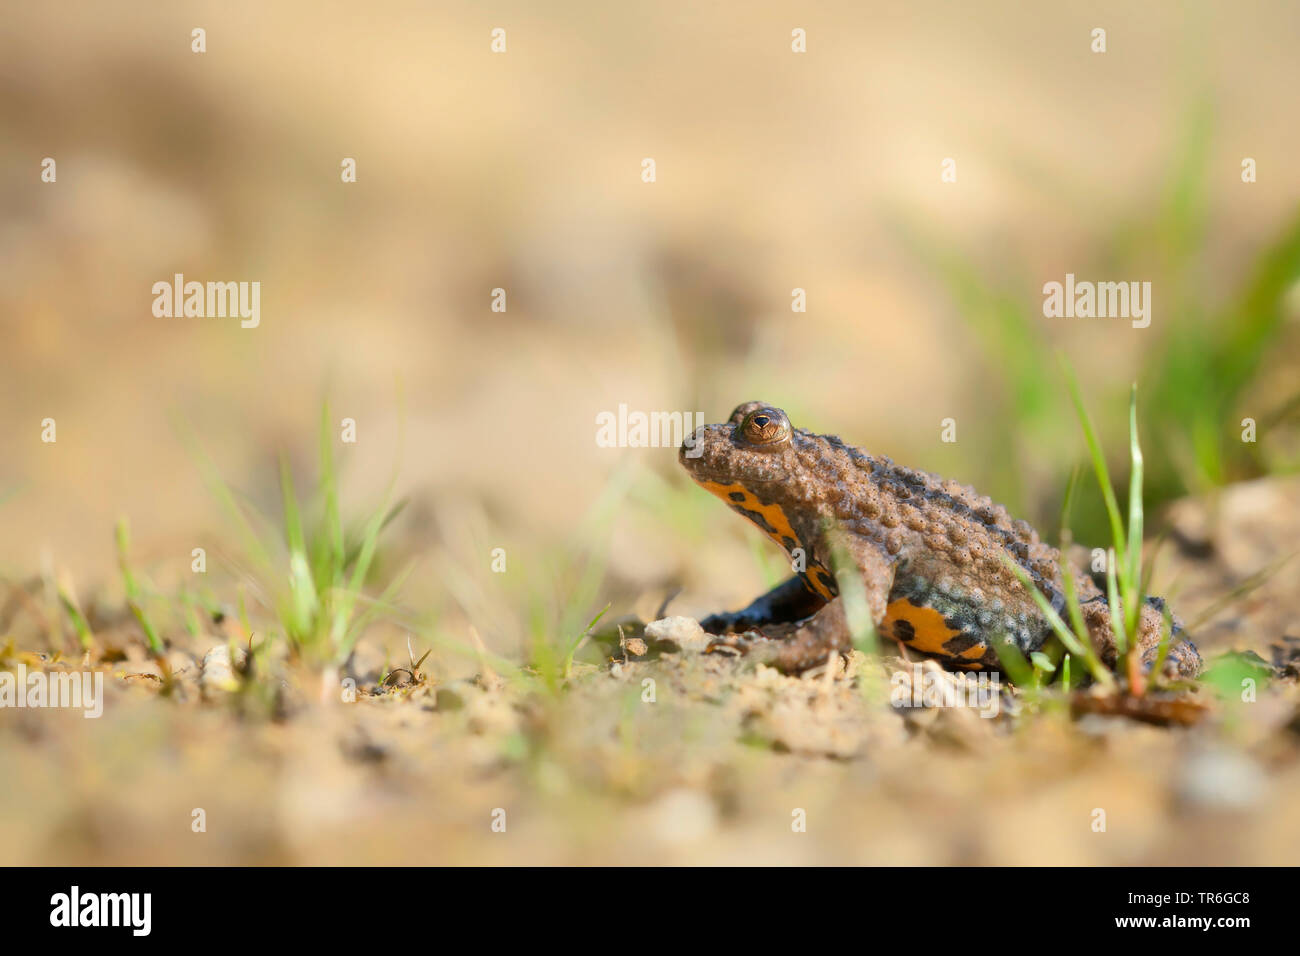 yellow-bellied toad, yellowbelly toad, variegated fire-toad (Bombina variegata), on a muddy water side at sunbath, Germany, North Rhine-Westphalia, Bergisches Land Stock Photo